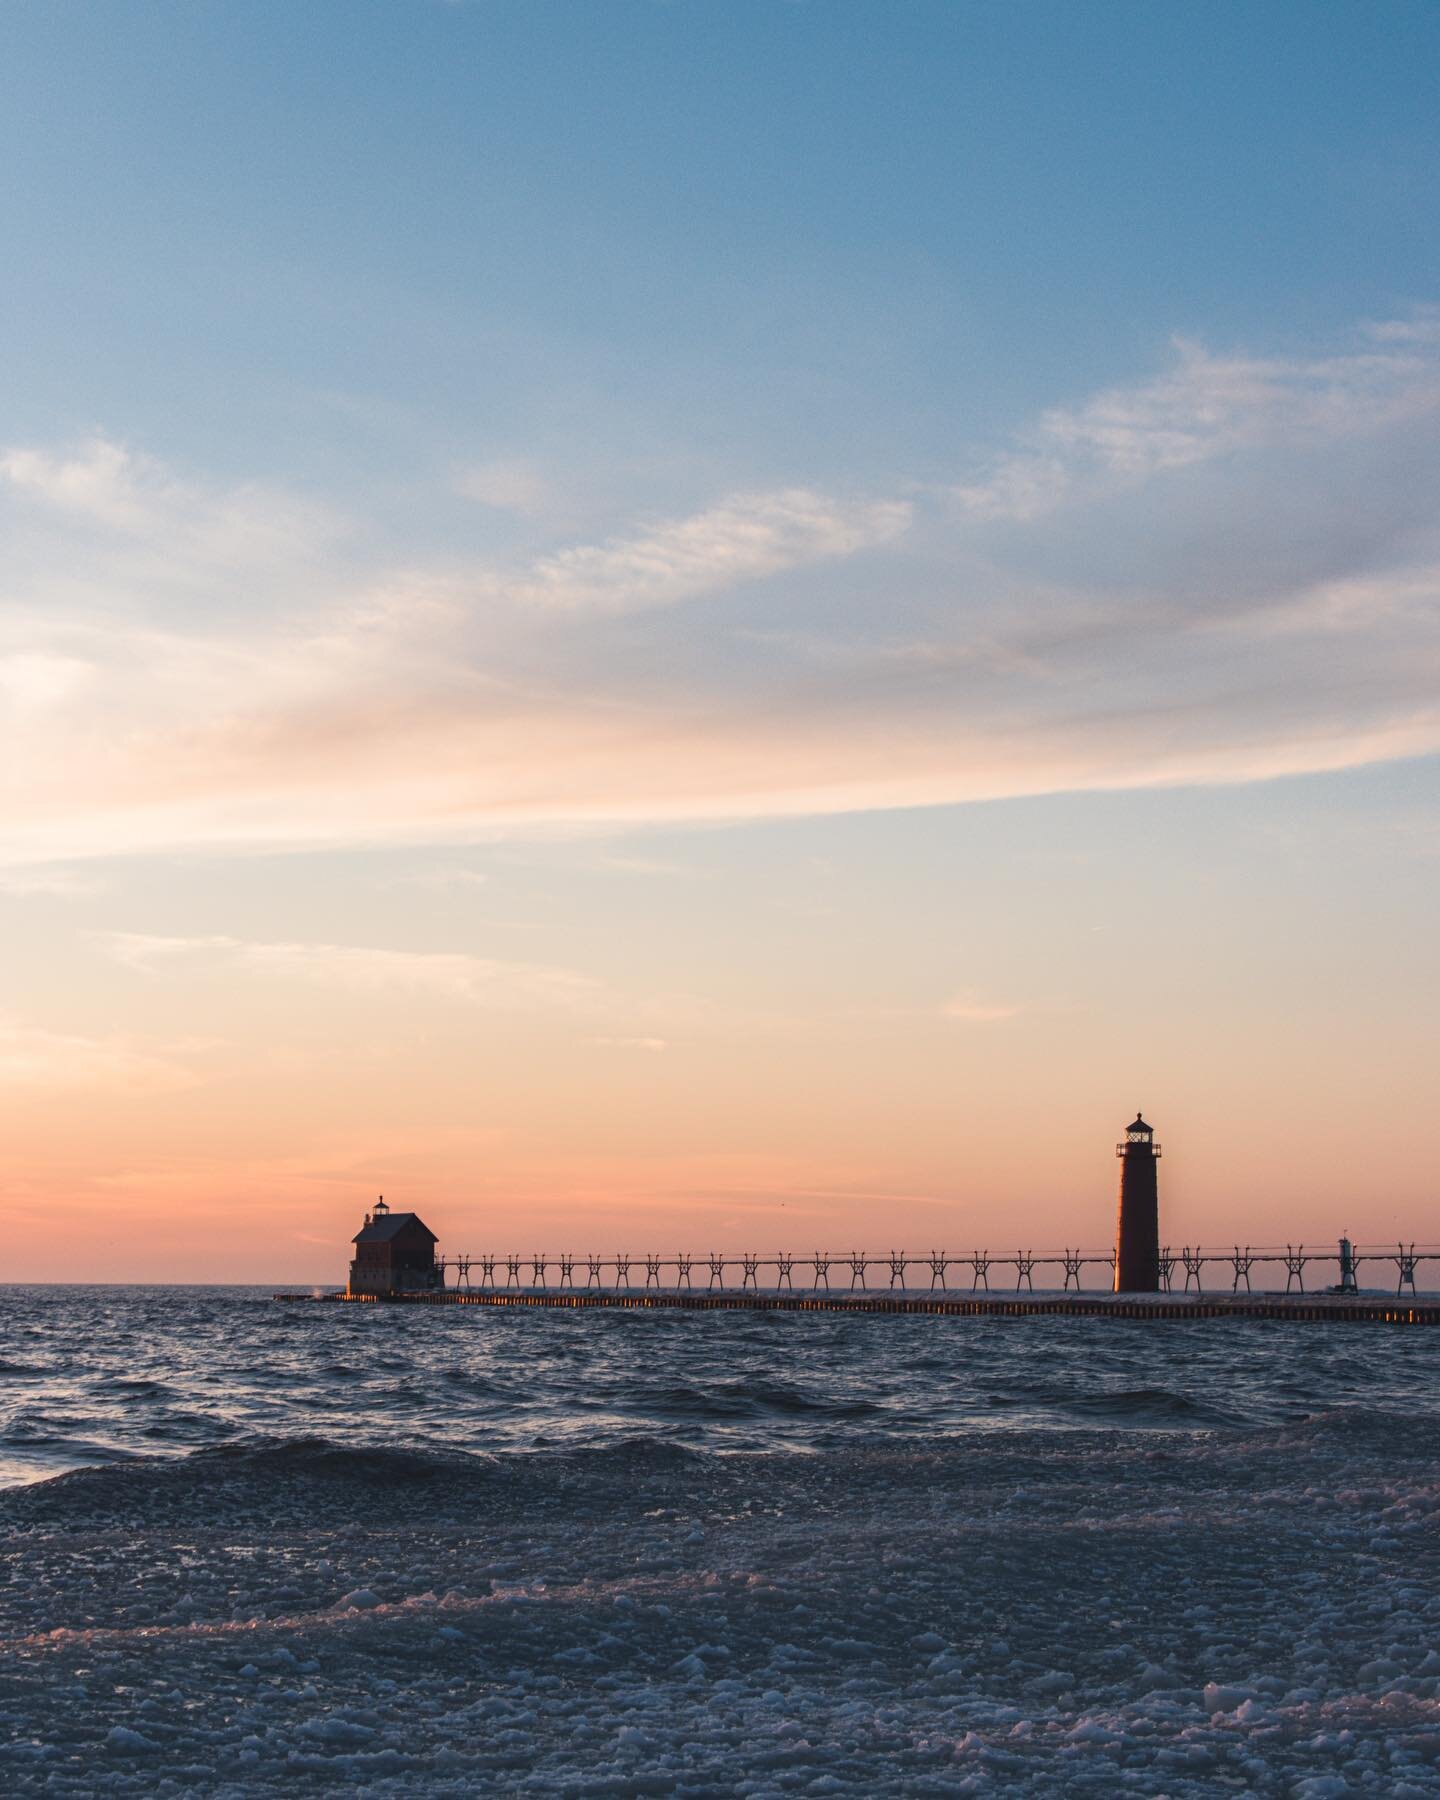 Here&rsquo;s about half the angles you can take at Grand Haven lol
.
.
.
.
.

#pixel_ig&nbsp;#getlost&nbsp;#natgeo #puremichigan #featurepalette #quietthechaos #thecreatorclass&nbsp;#ig_landscape #trapping_tones #ig_masterpiece #ig_podium #splendid_e